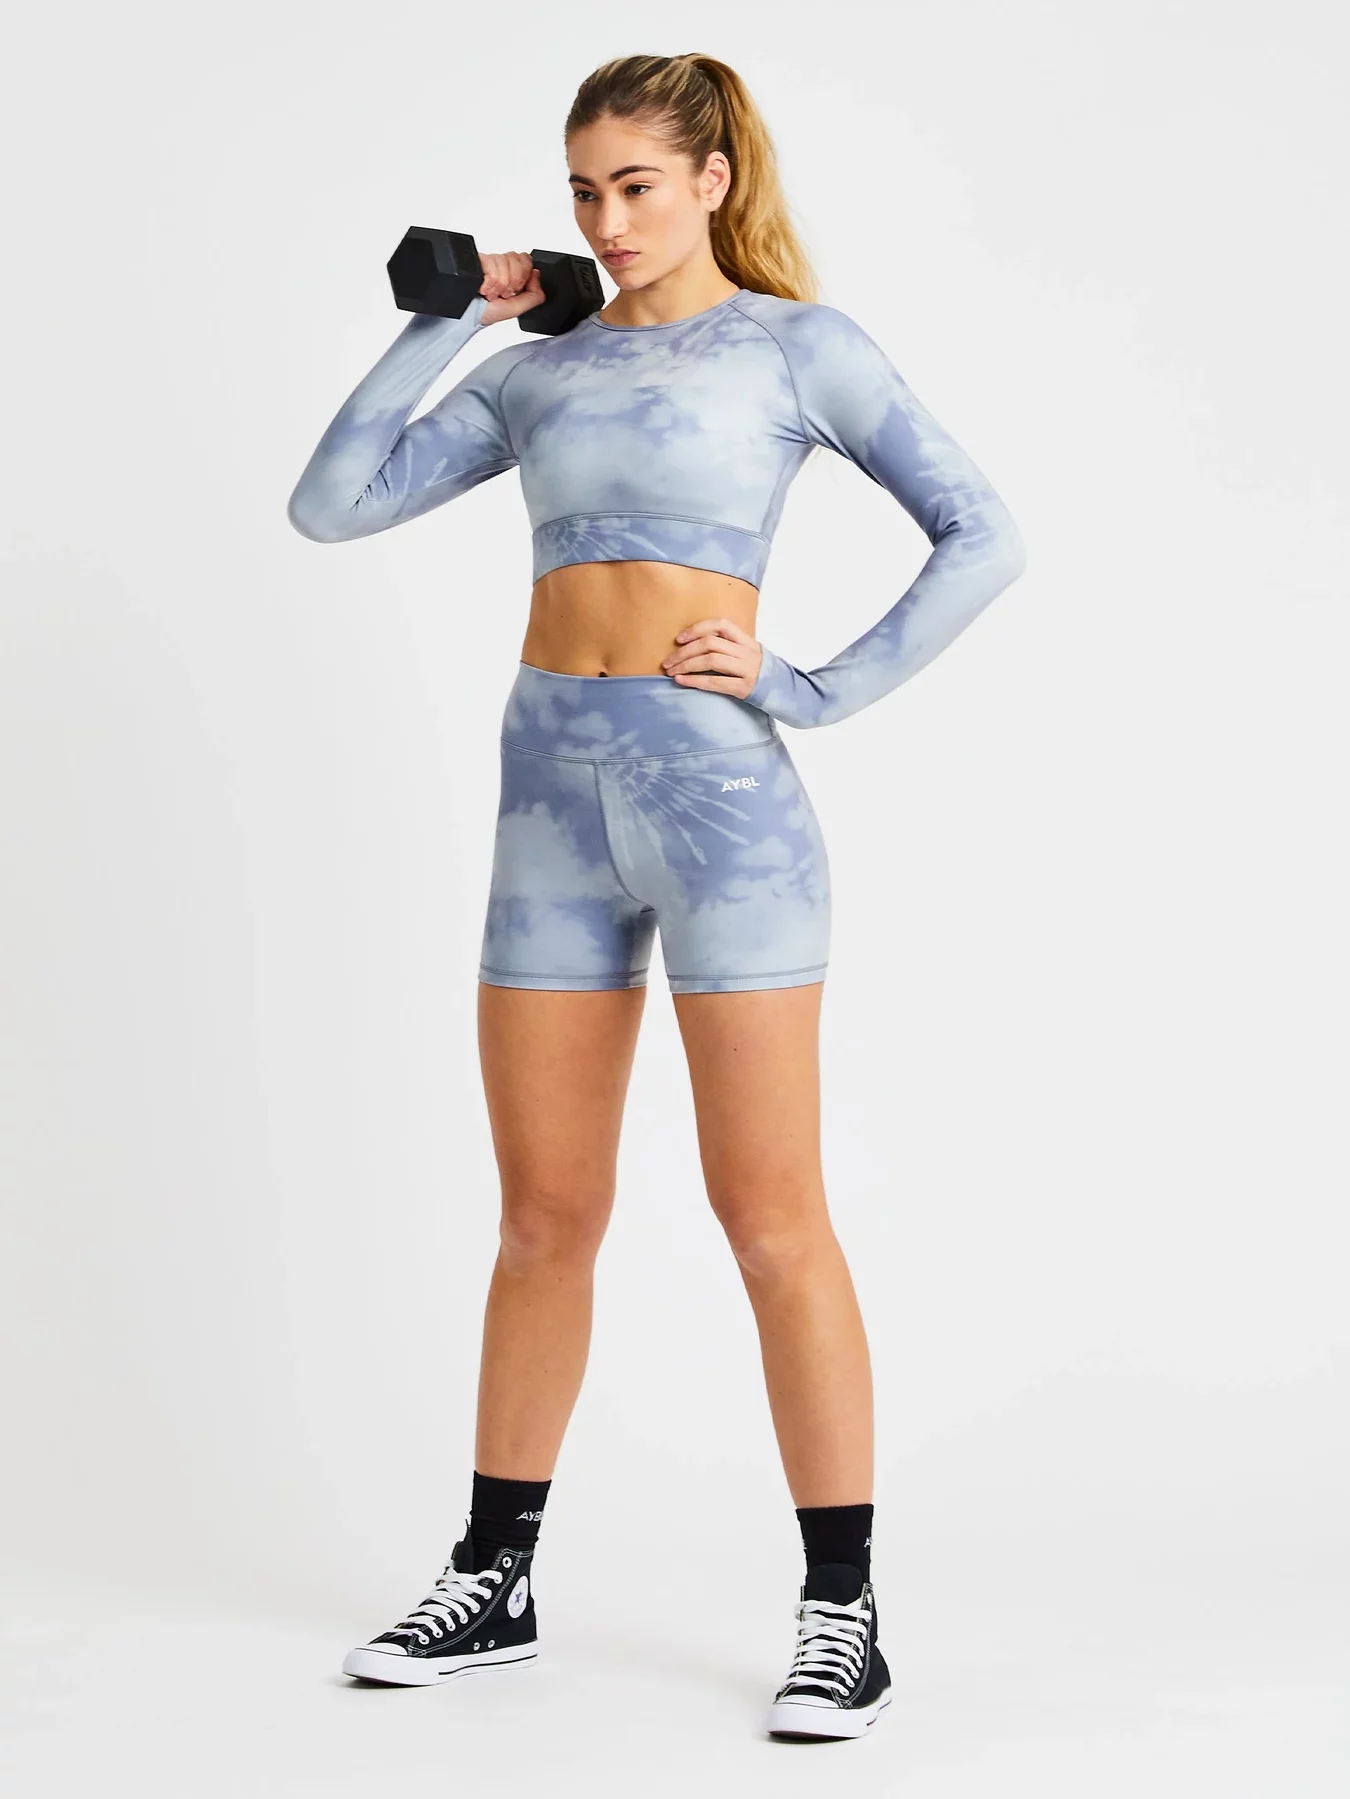 The model is holding a weight and modeling a cropped long sleeve workout top and biker shorts in blue and grey tie dye.